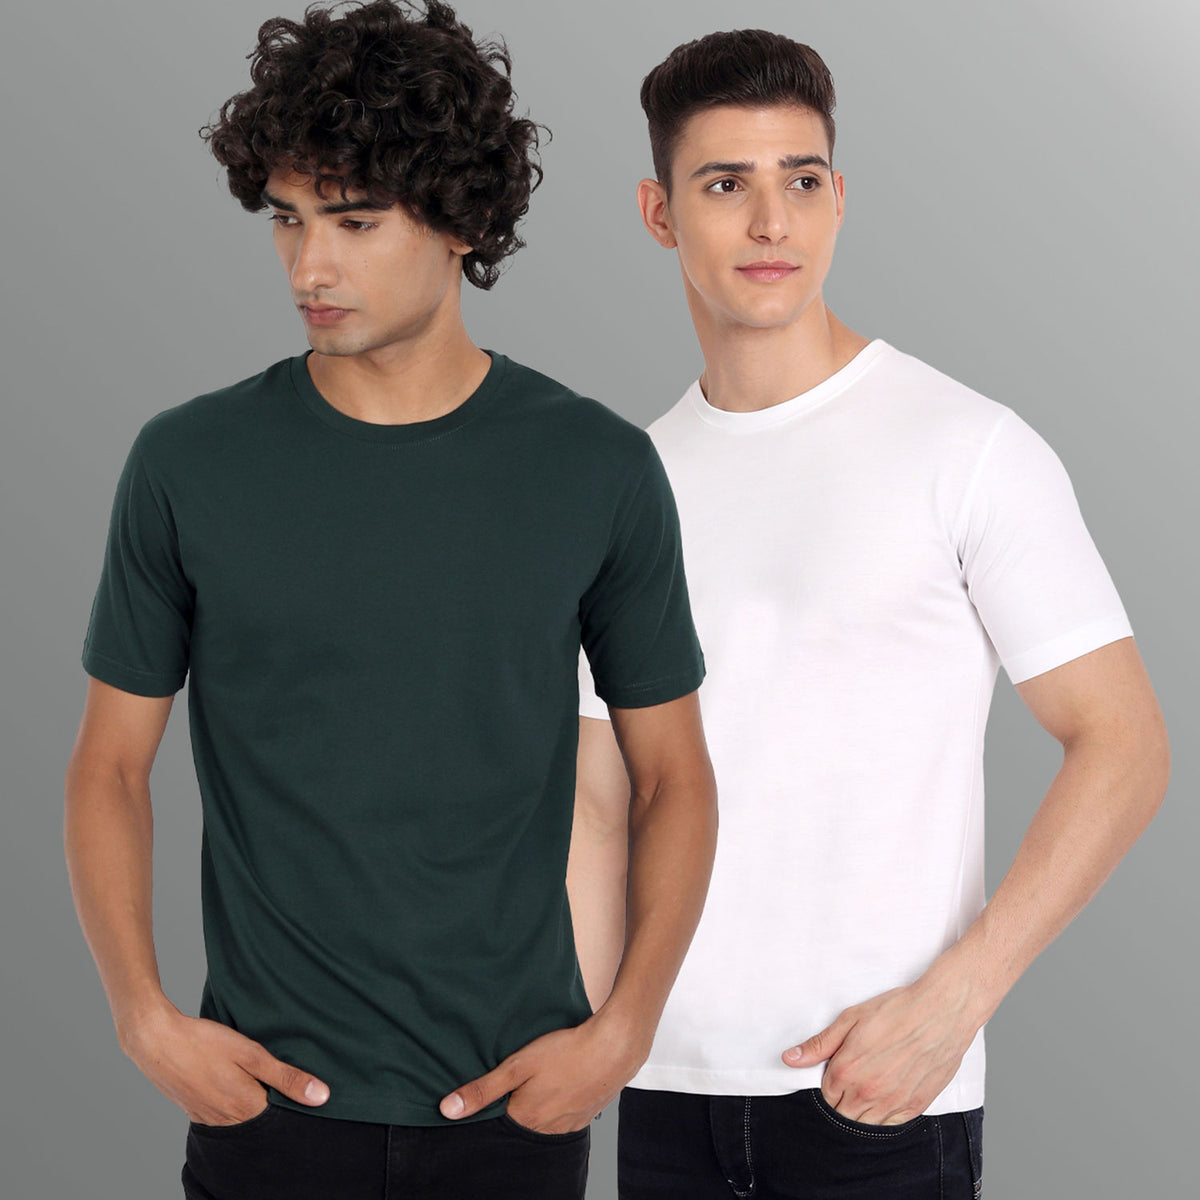 Half Sleeve Green and White T-shirt Combo For Men